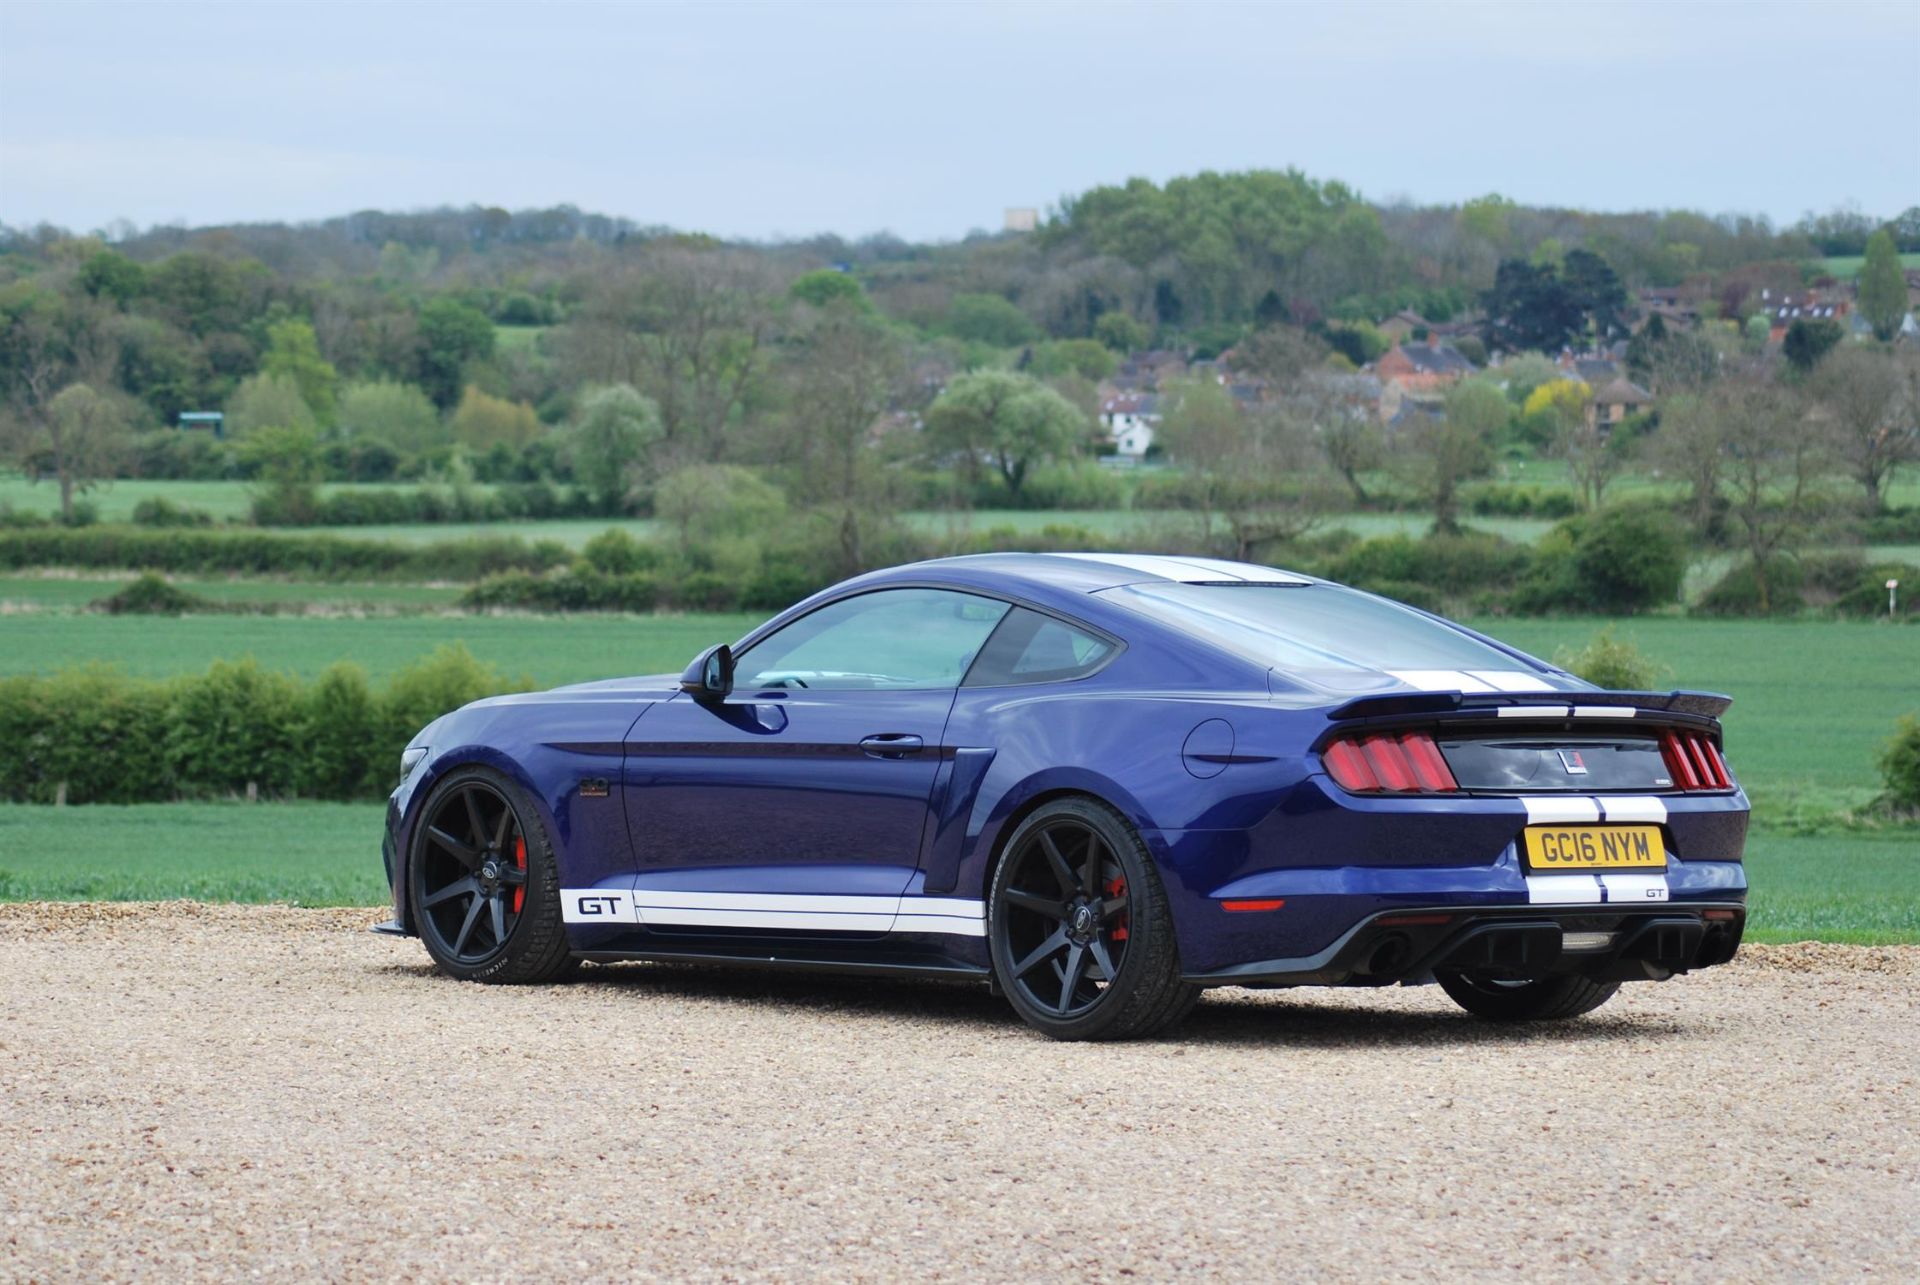 2016 Ford Mustang 5.0-Litre V8 GT S550 Roush Supercharged - Image 4 of 10